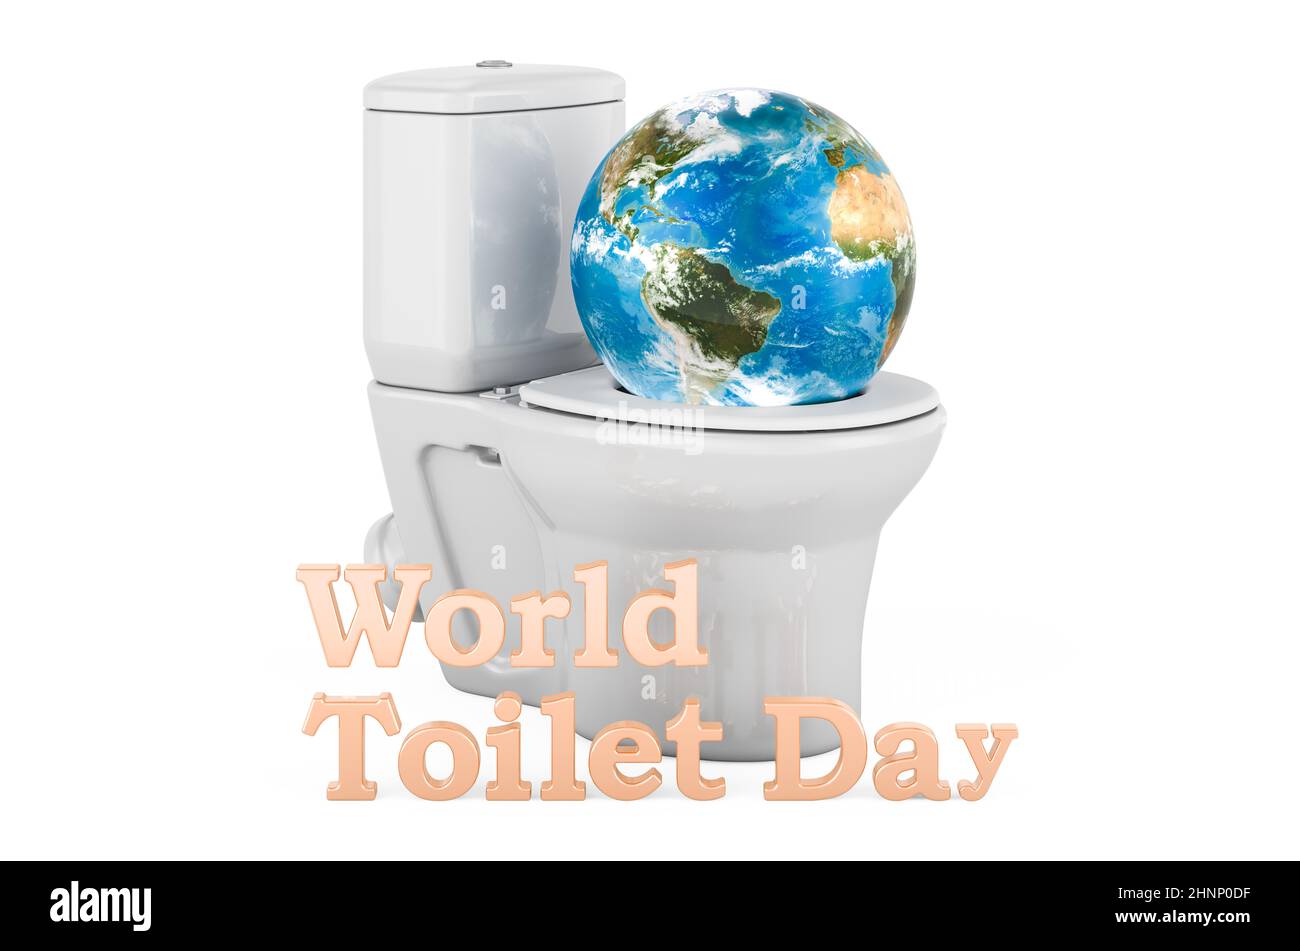 World toilet day concept. Toilet bowl with Earth Globe, 3D rendering isolated on white background Stock Photo